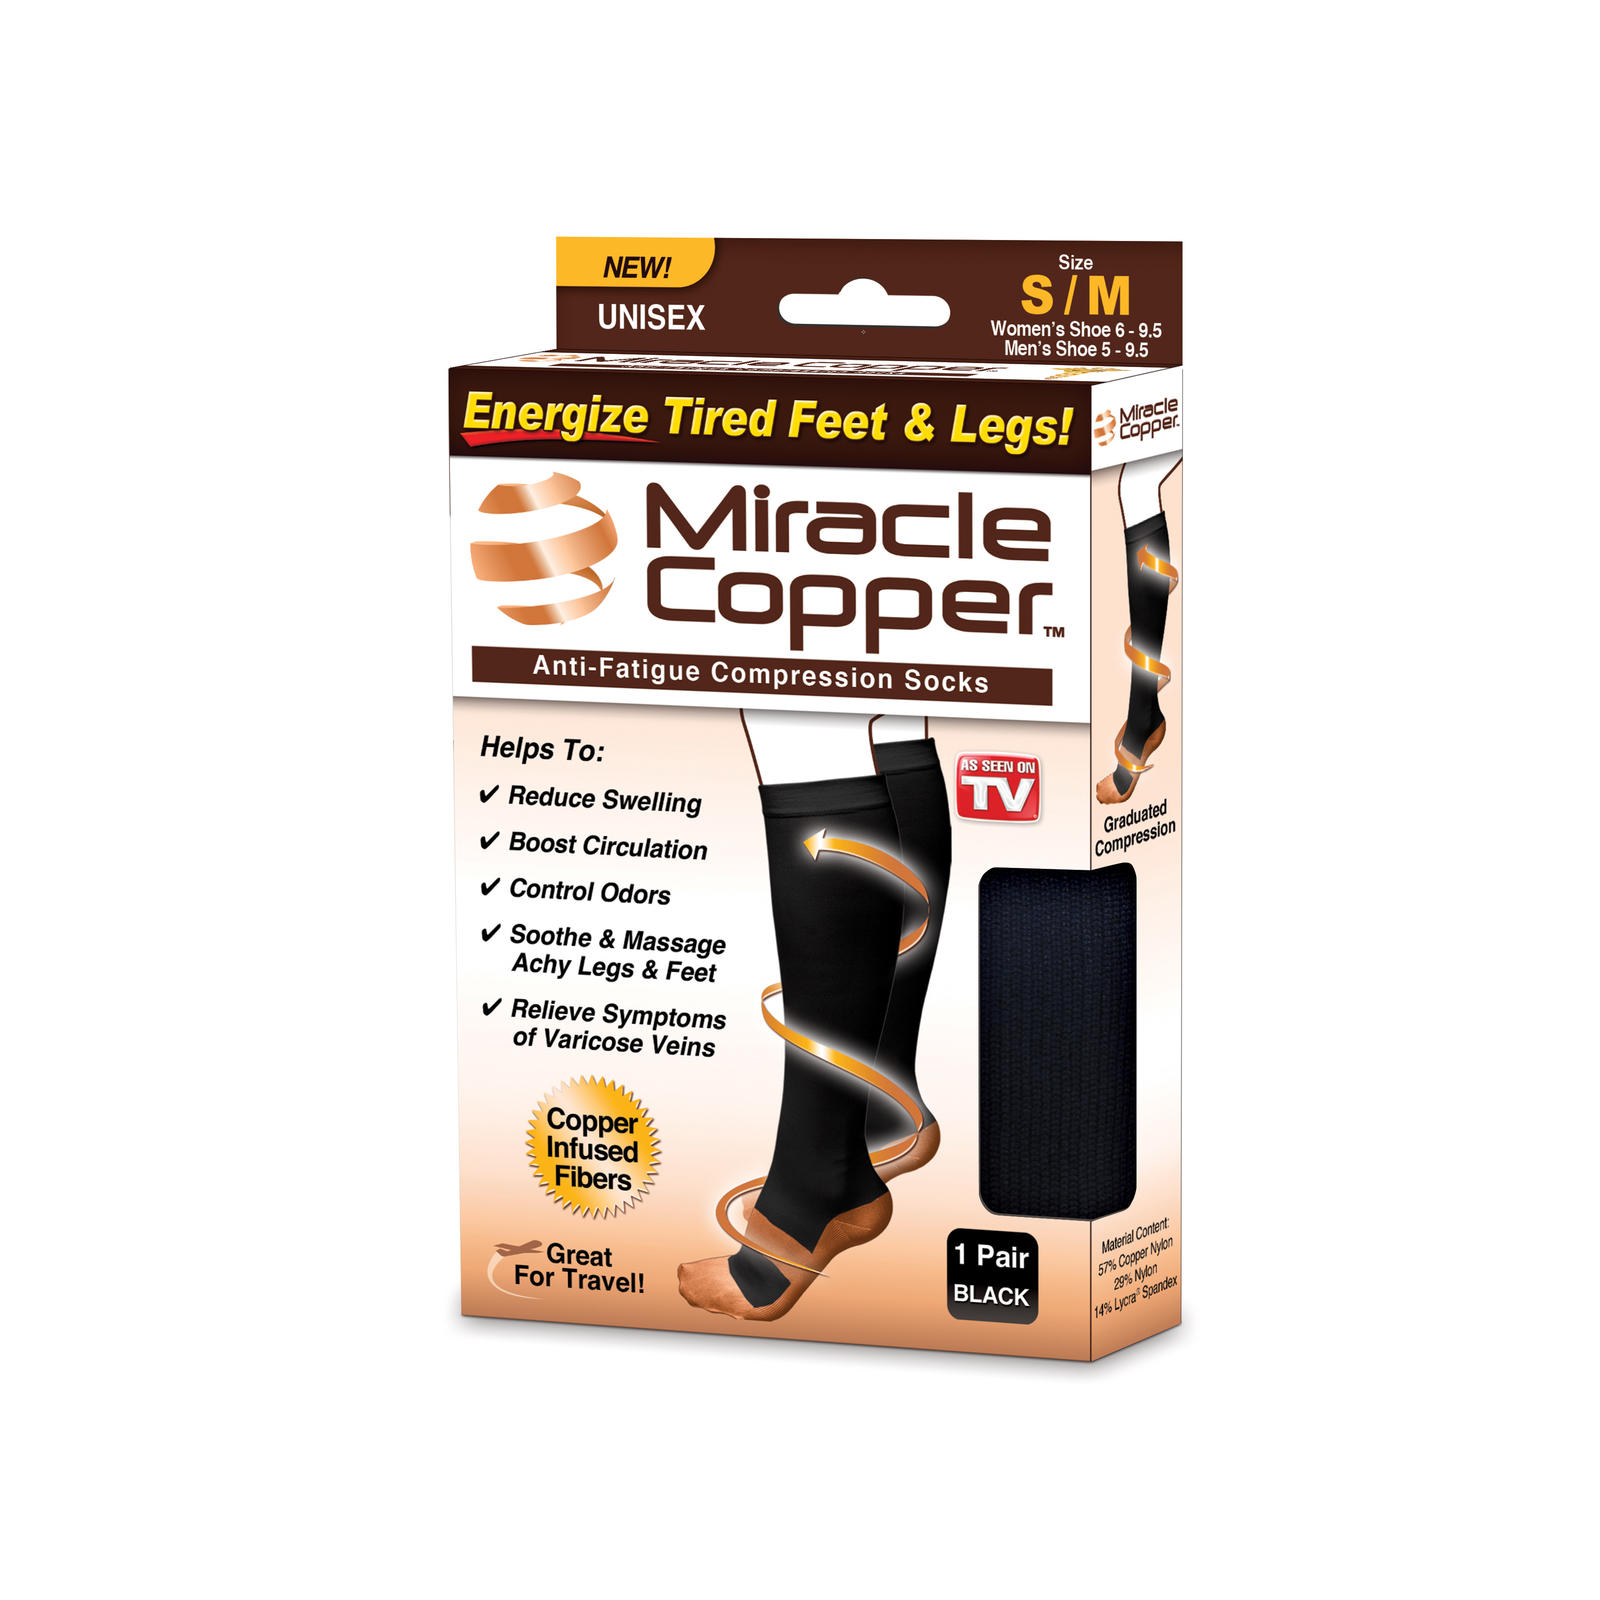 As Seen On TV Miracle Copper Anti-Fatigue Compression Socks